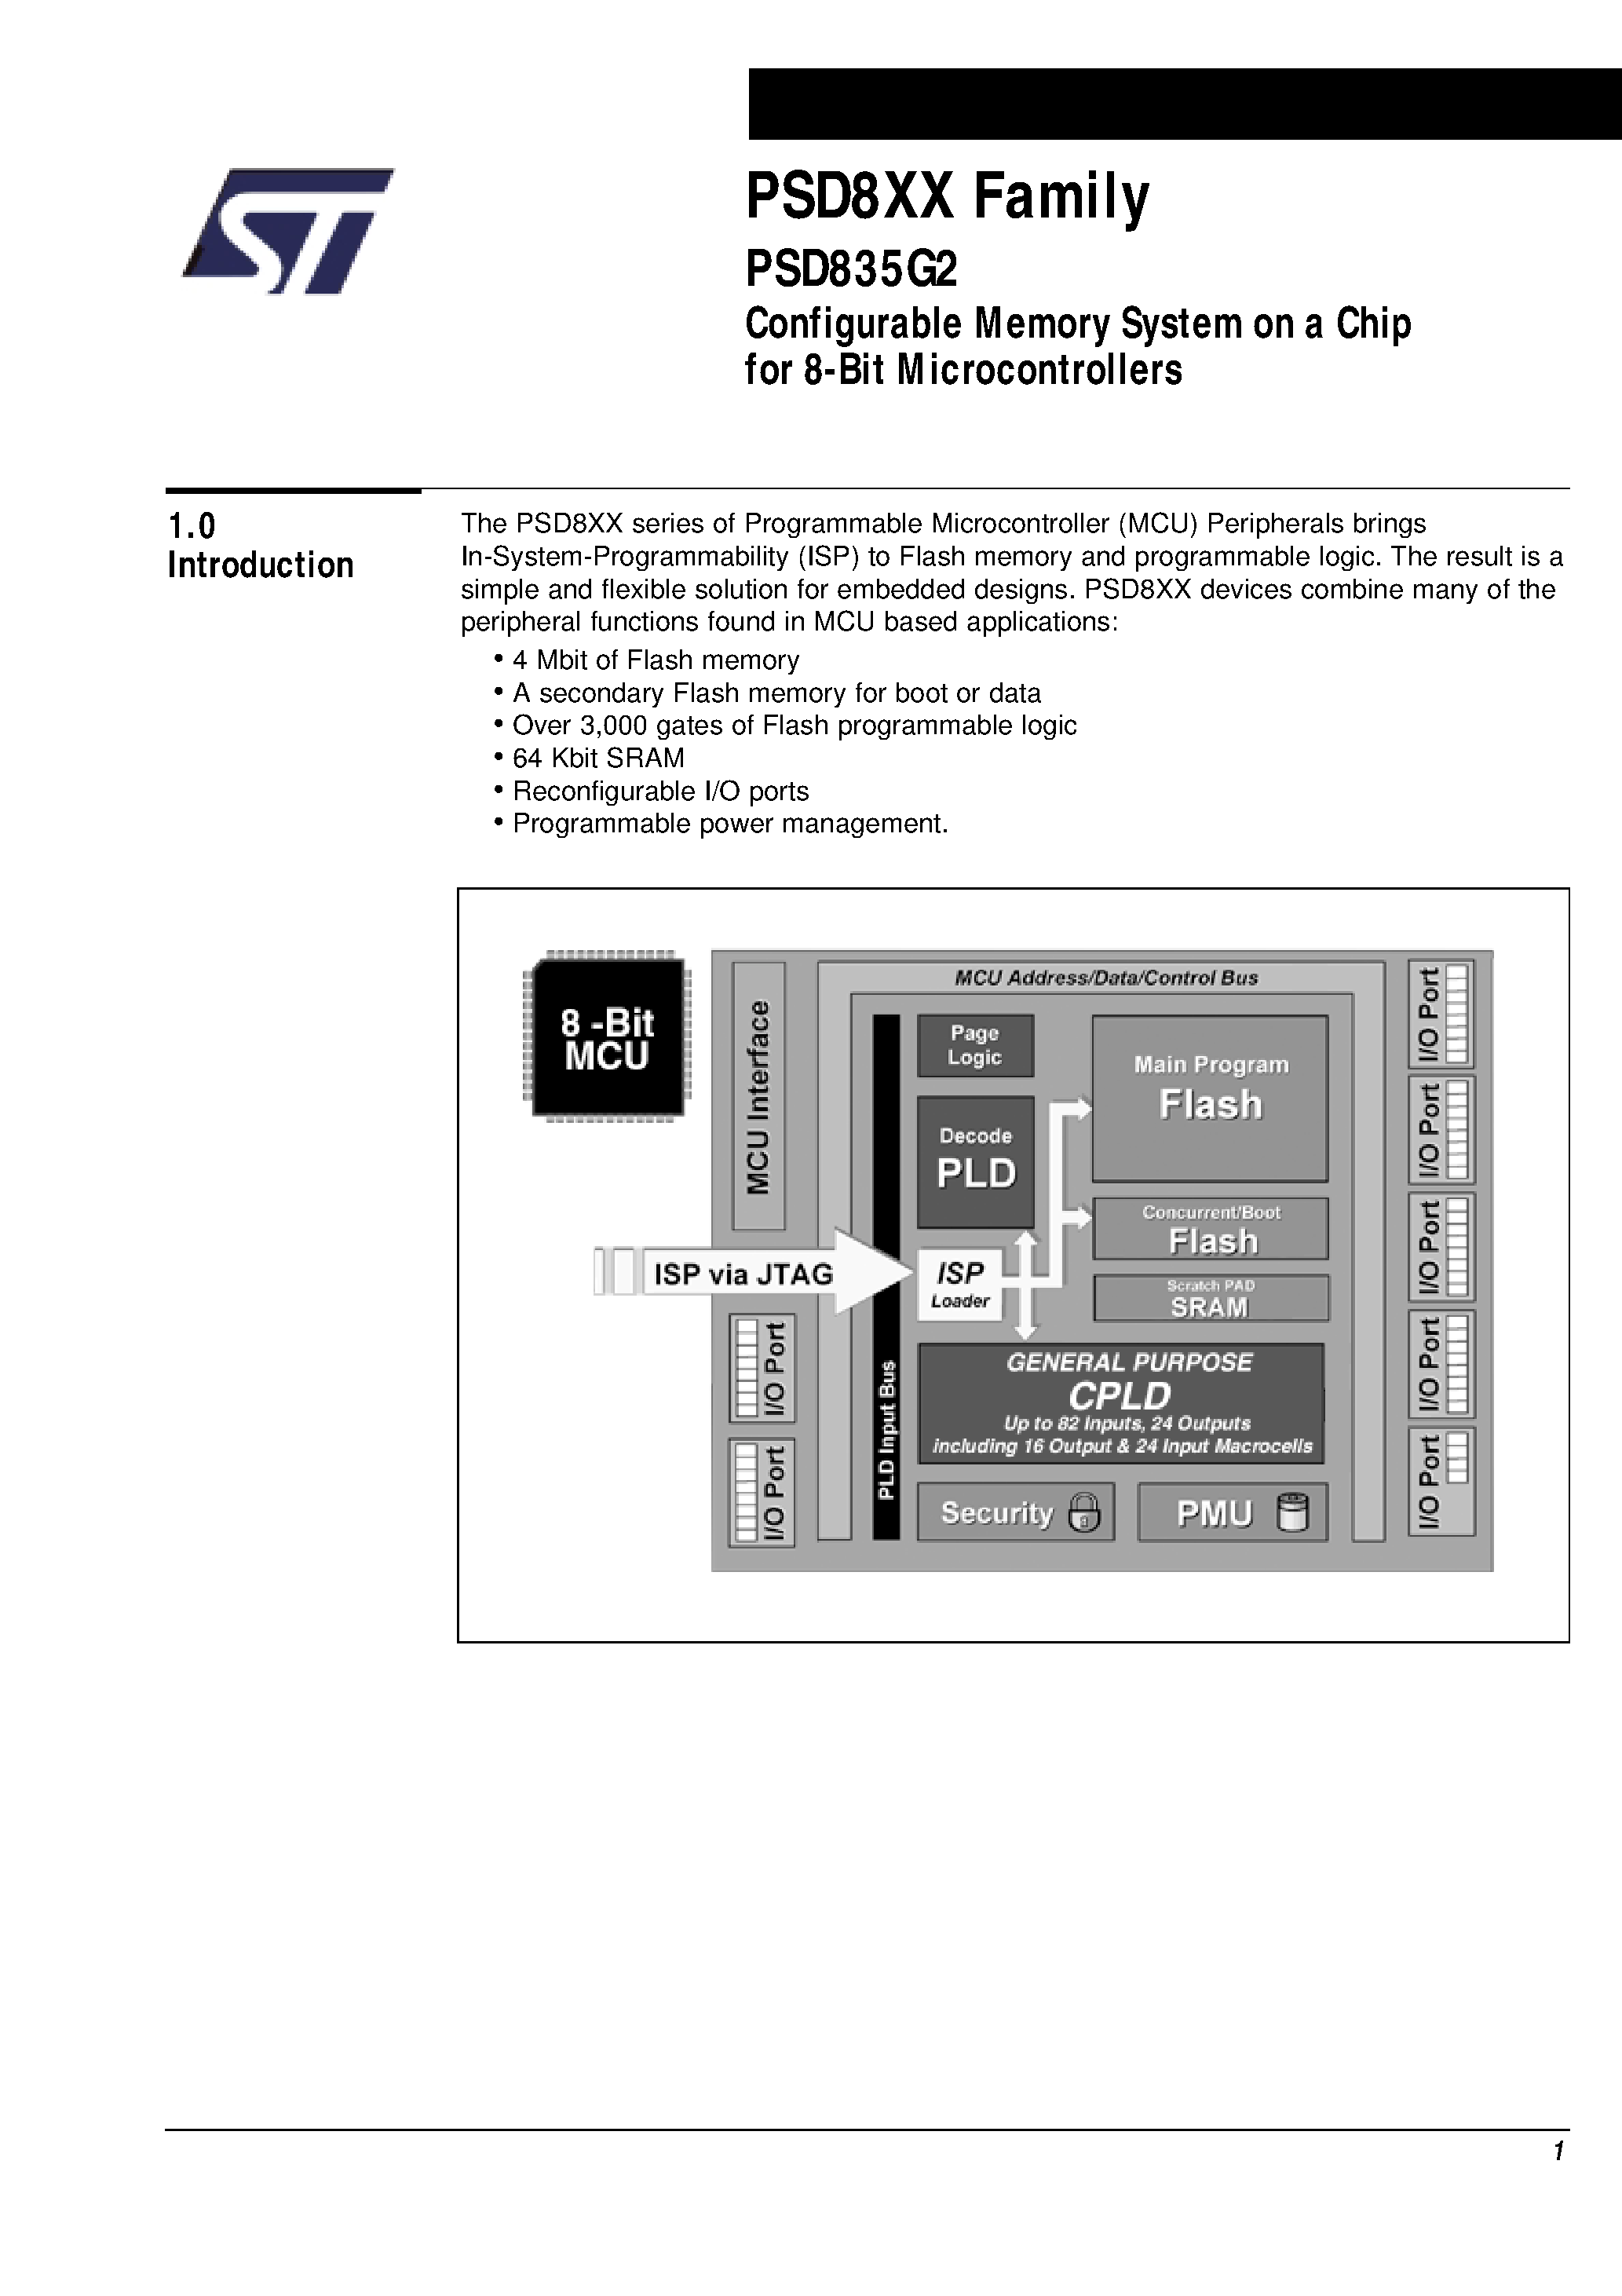 Datasheet PSD835F1V-A-90UI - Configurable Memory System on a Chip for 8-Bit Microcontrollers page 2